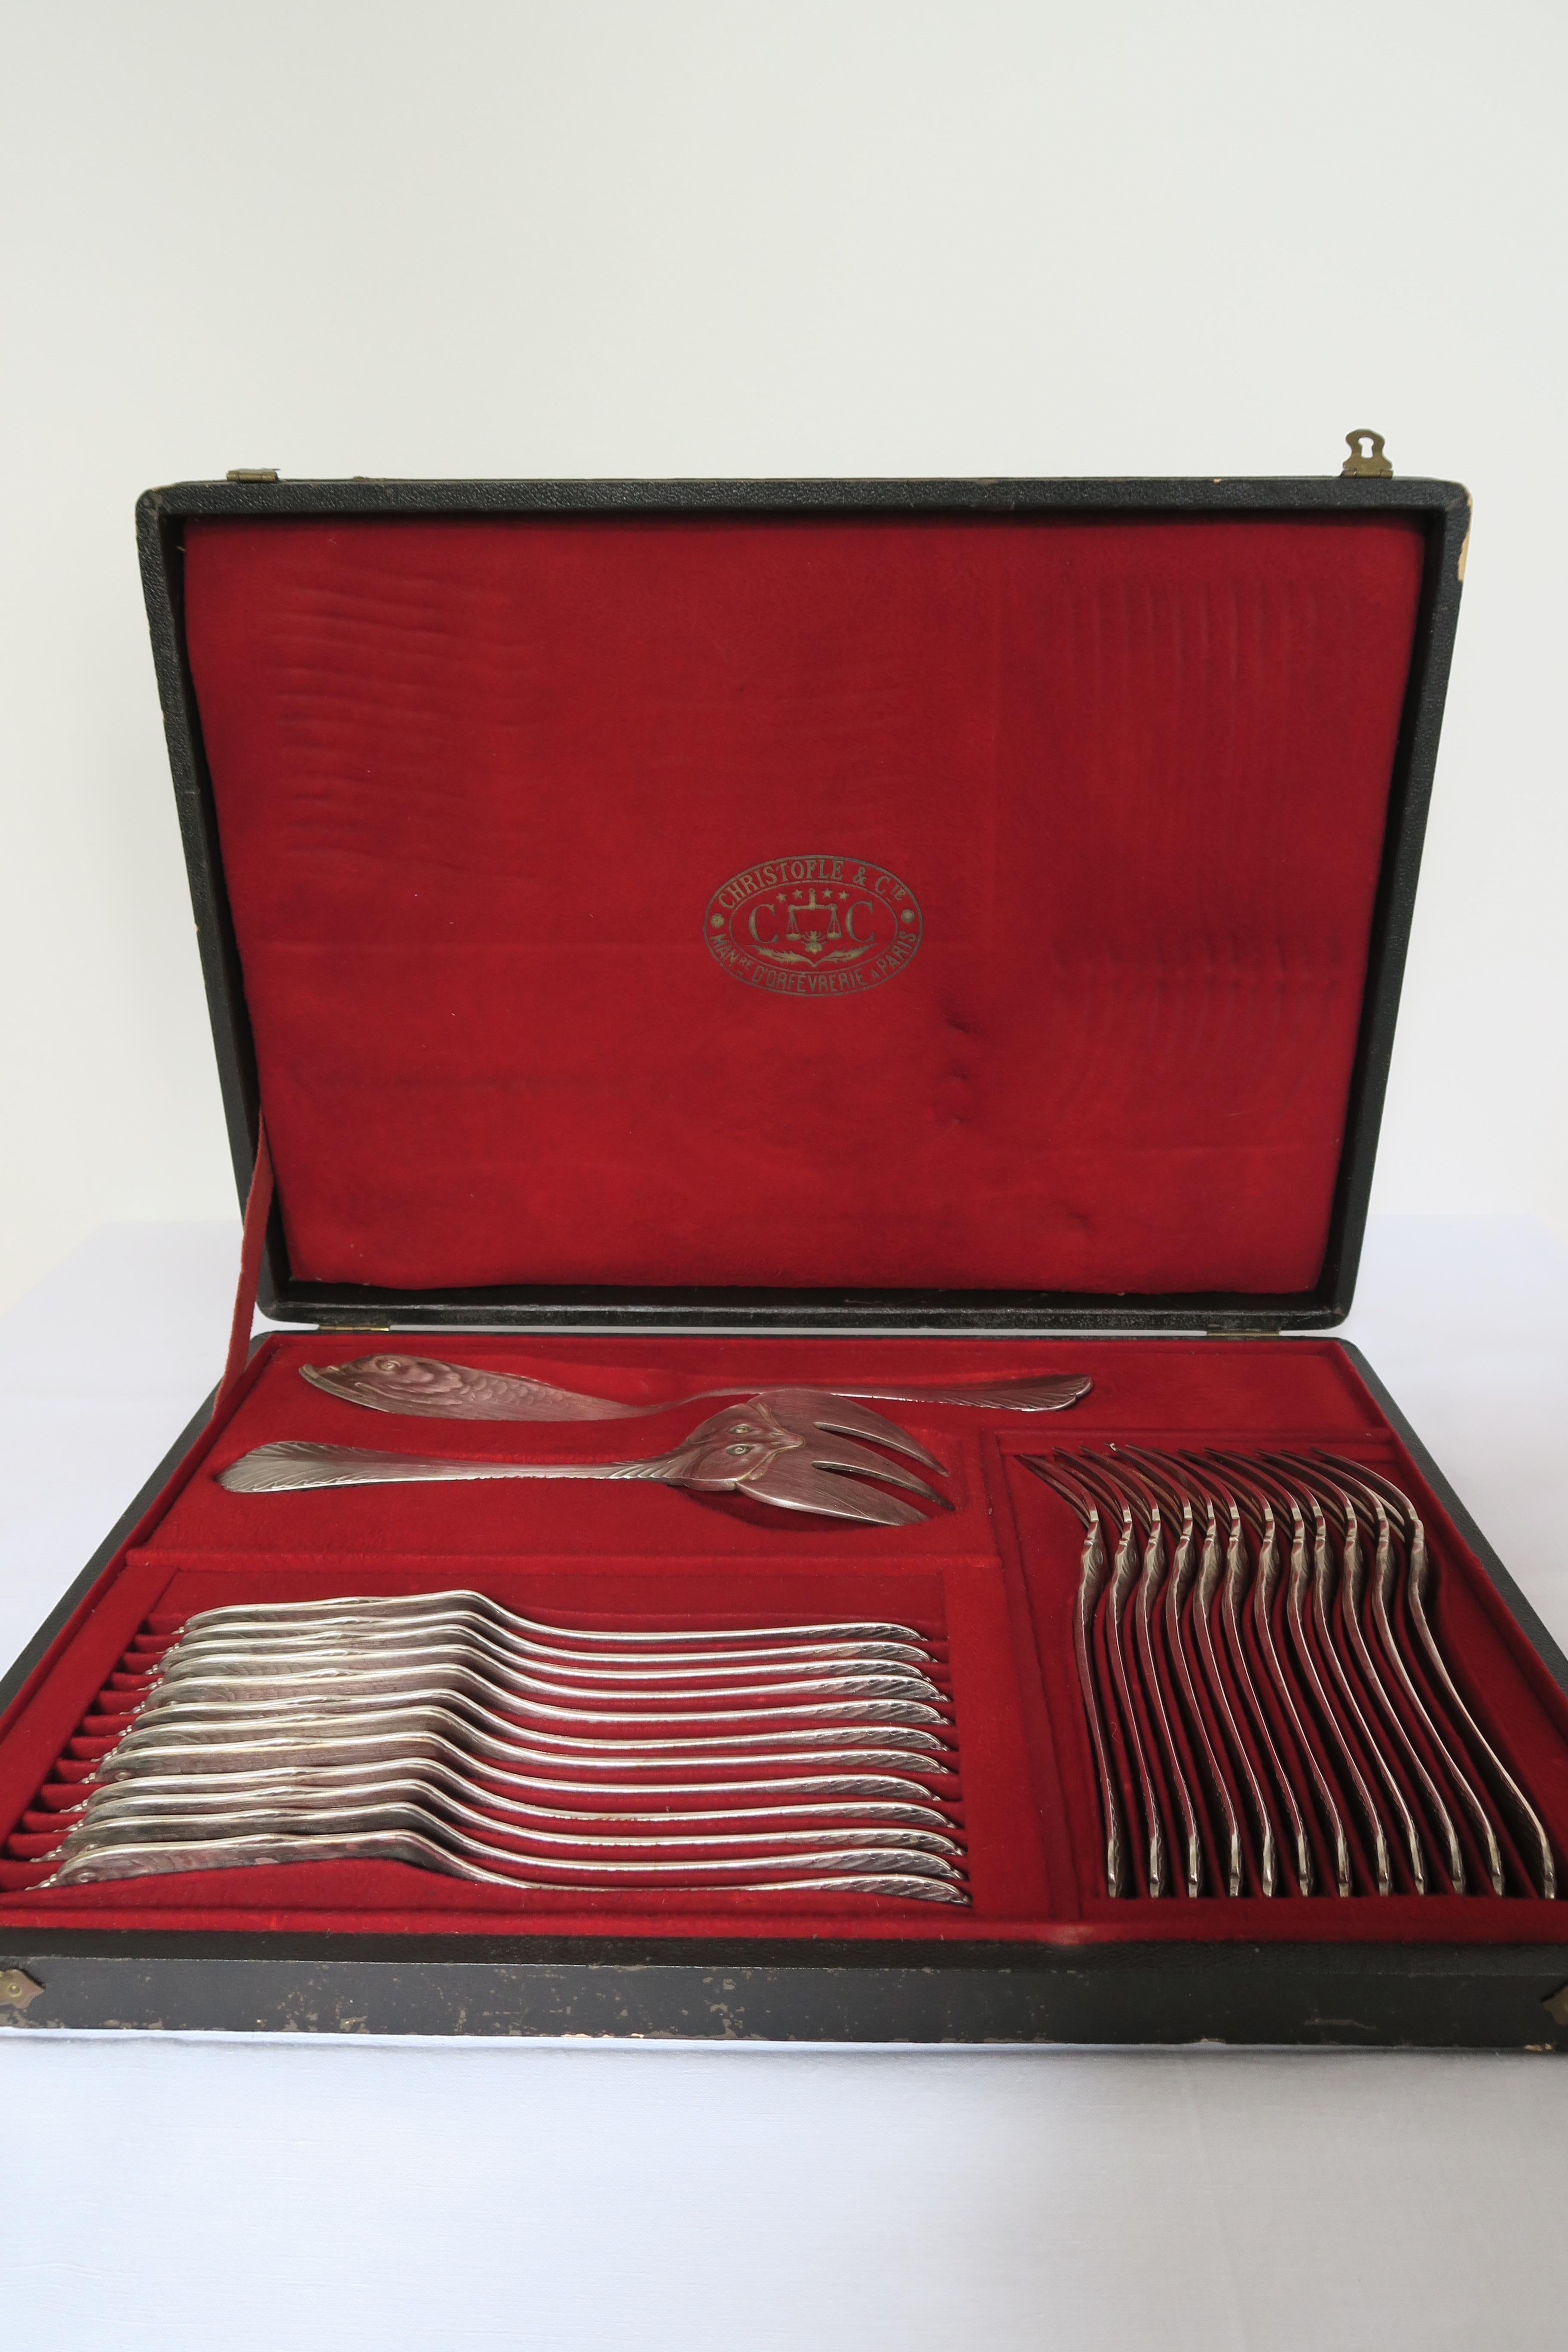 Rare and original tableware set by renowned French silverware manufacture Christofle.
The set consists of 12 fish knives and 12 forks, 1 big serving knife and 1 big fork.
They were carefully crafted from stainless steel and plated with silver to